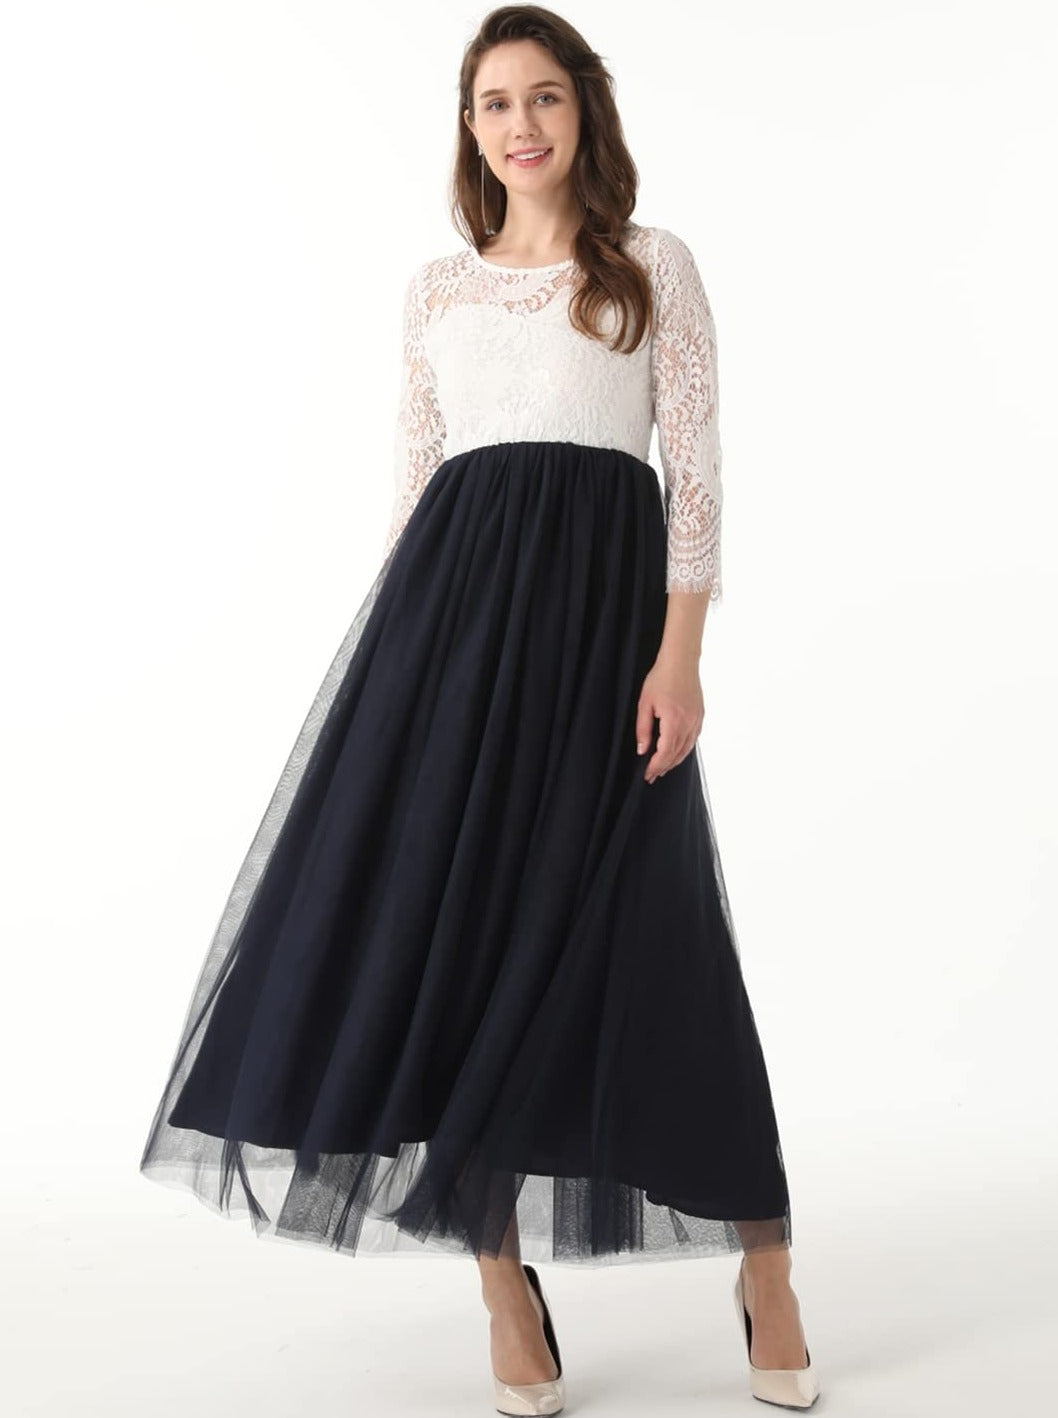 Peony Lace Dress for Women in Navy